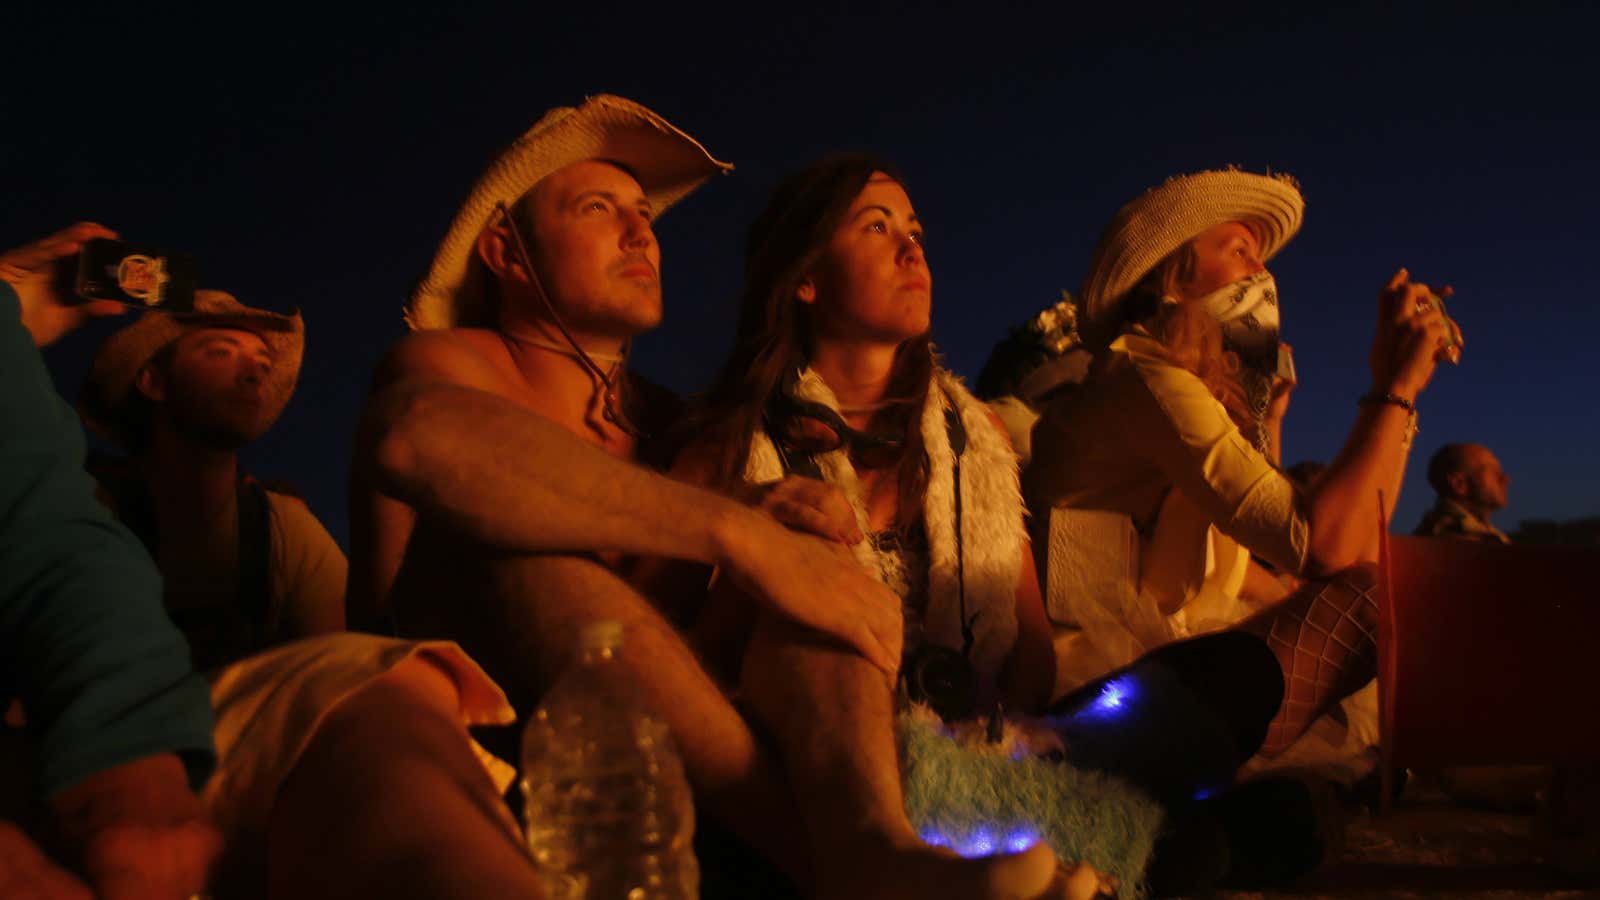 Burning Man is considered a rite of passage.